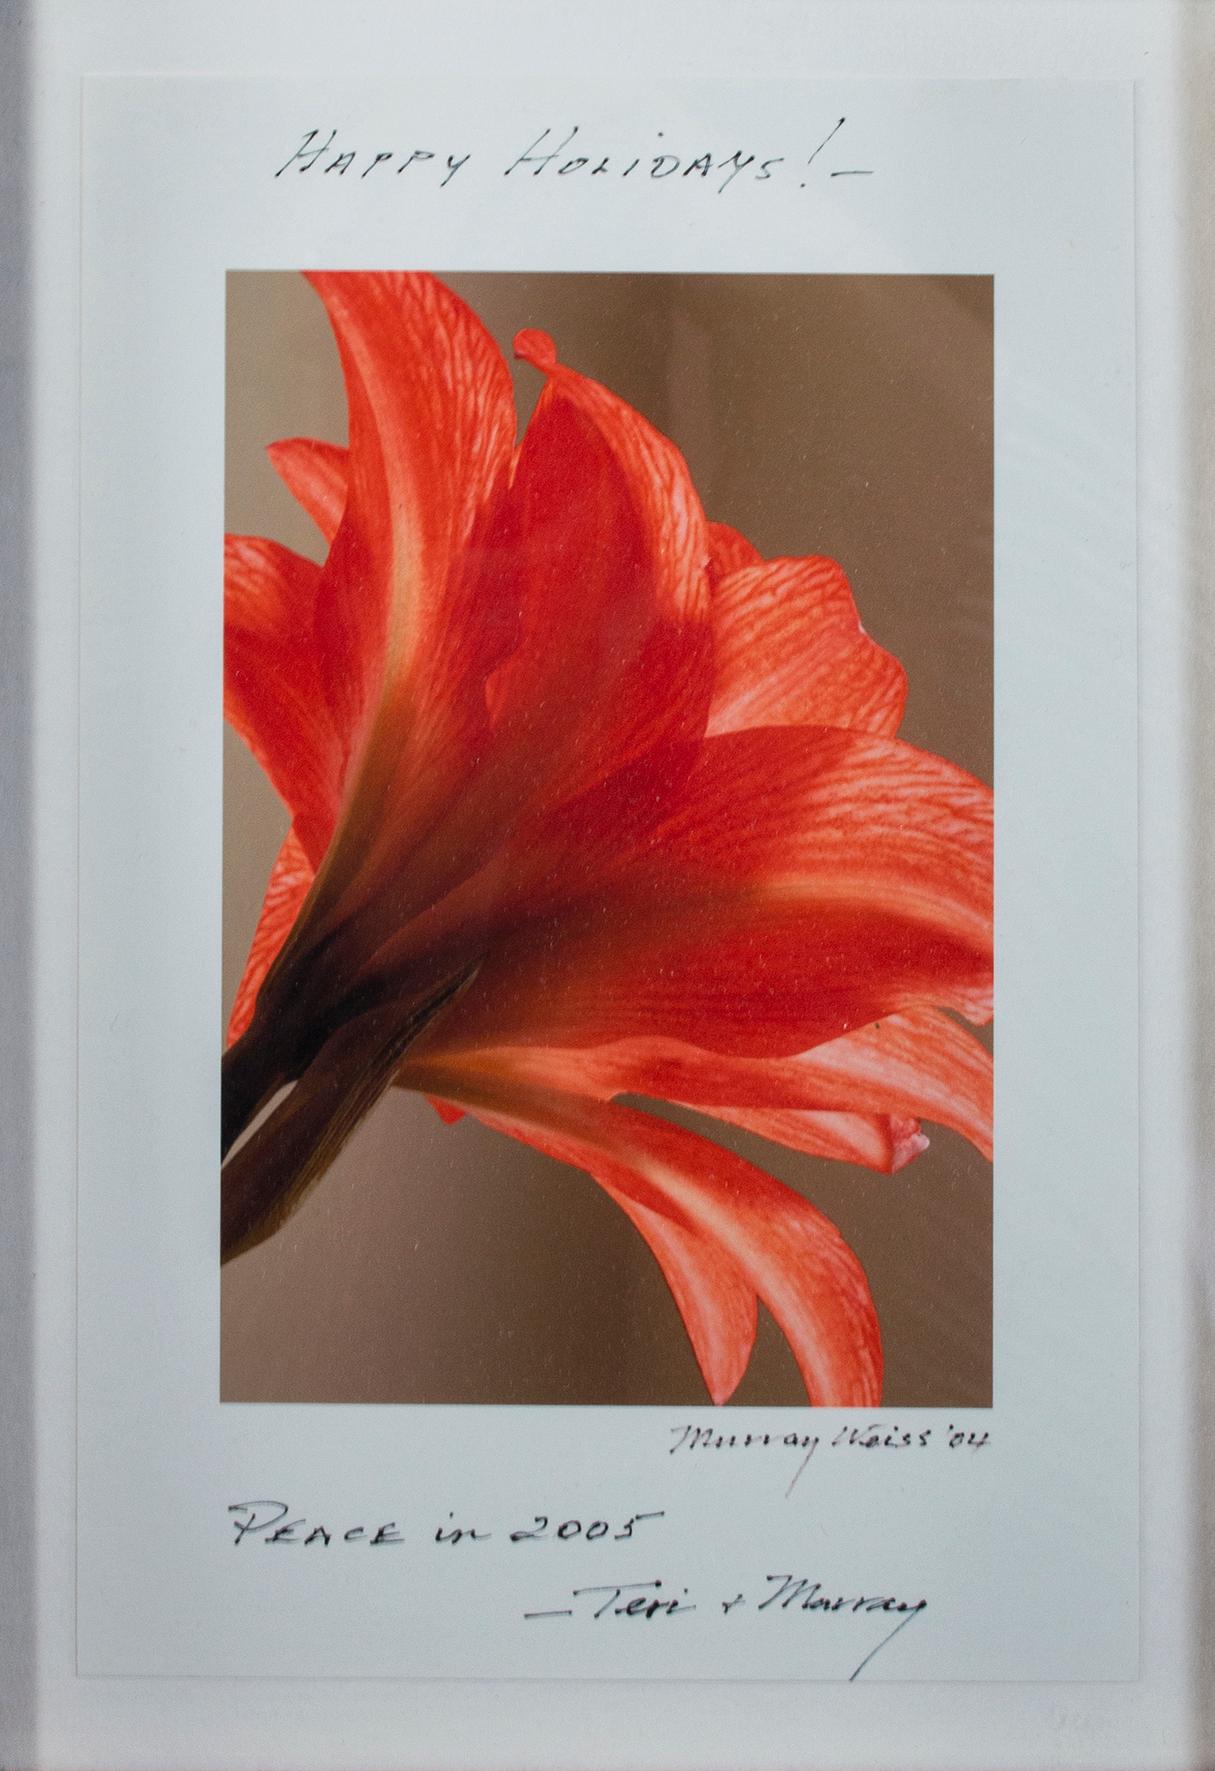 Murray Weiss Still-Life Photograph - "Red Orange Flower, inscribed 'Happy Holidays!' - Peace in 2005 - Teri & Murray"